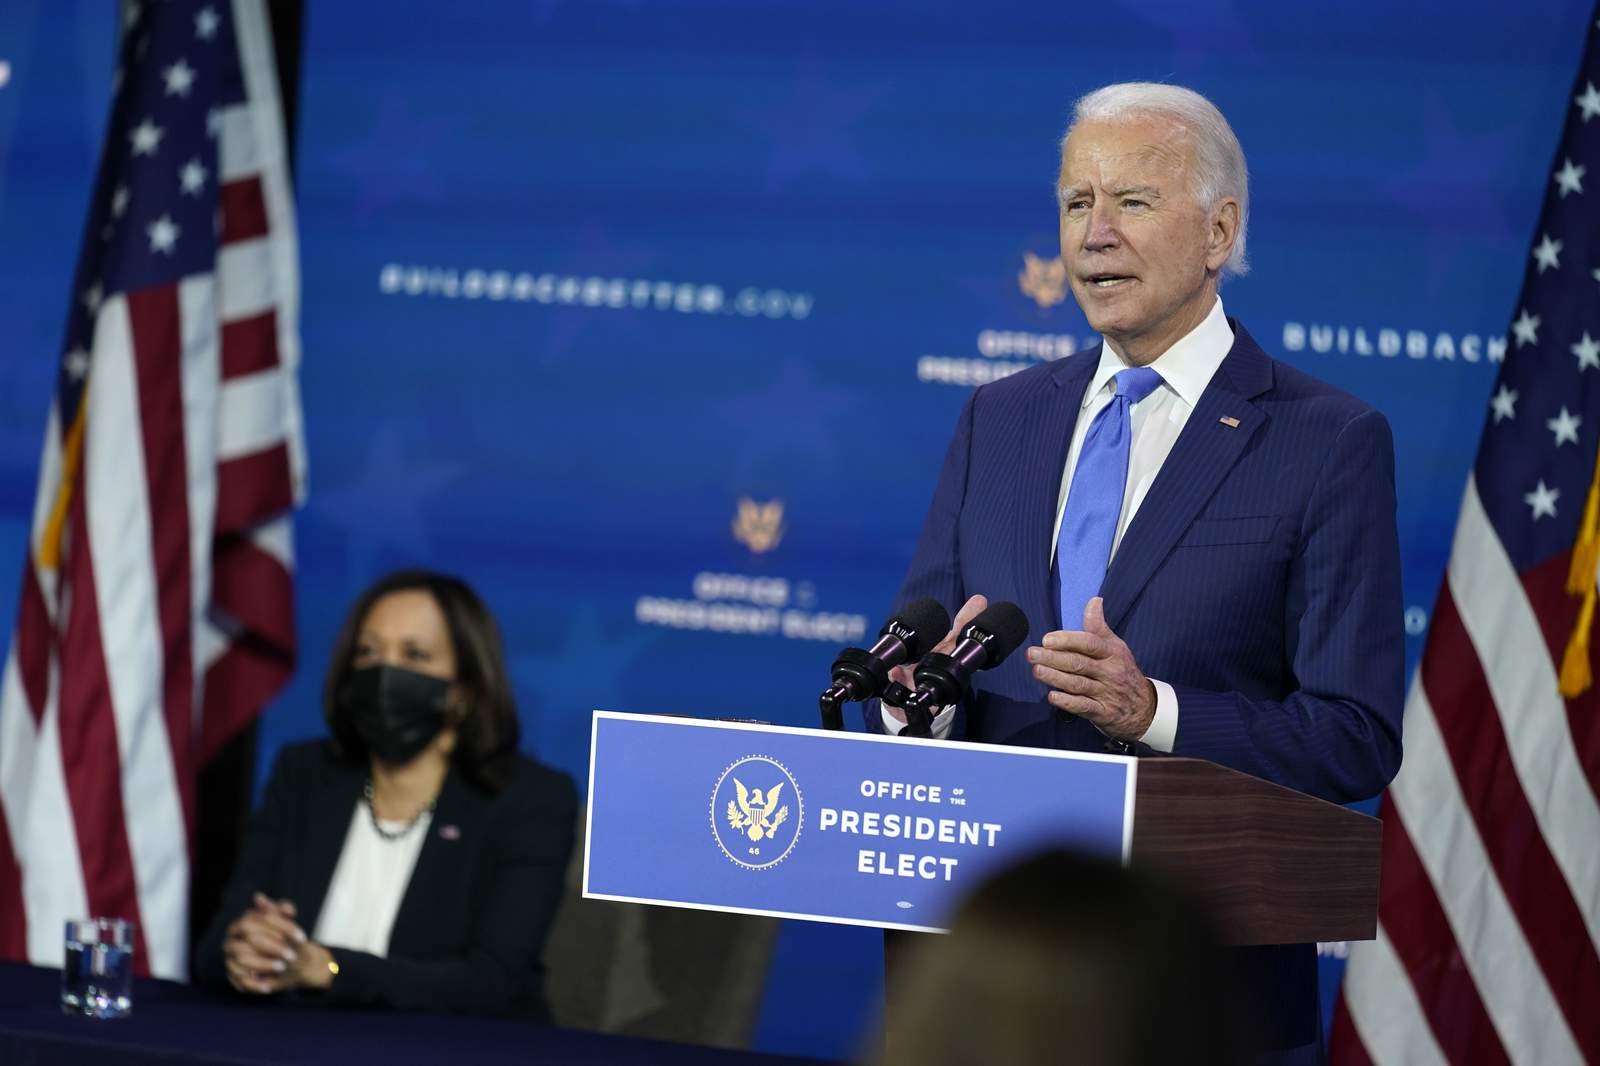 Next for Biden: Getting the right health team as virus rages